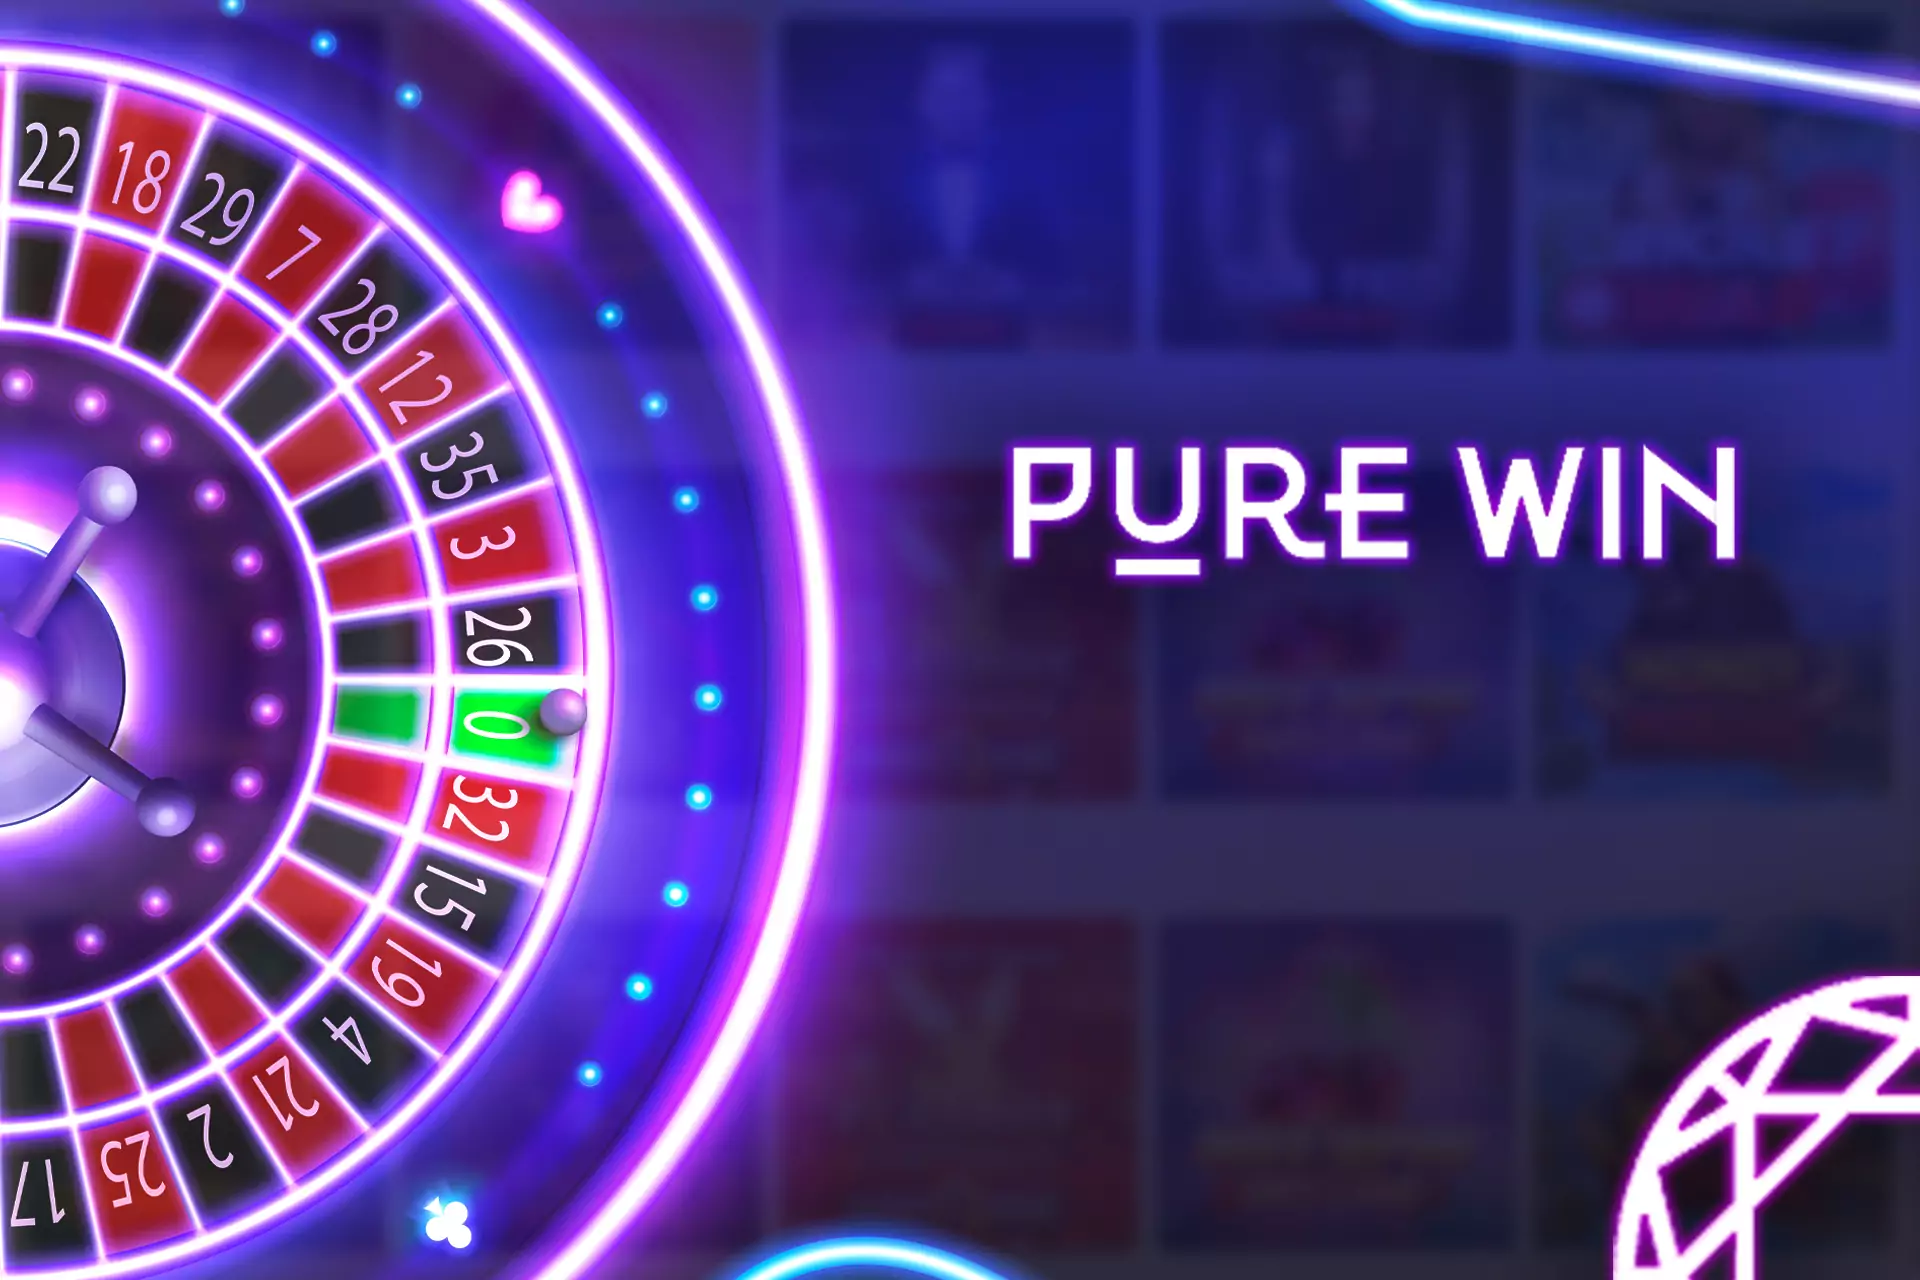 The Pure Win Casino presents users with a welcome bonus of up to 90000 INR.